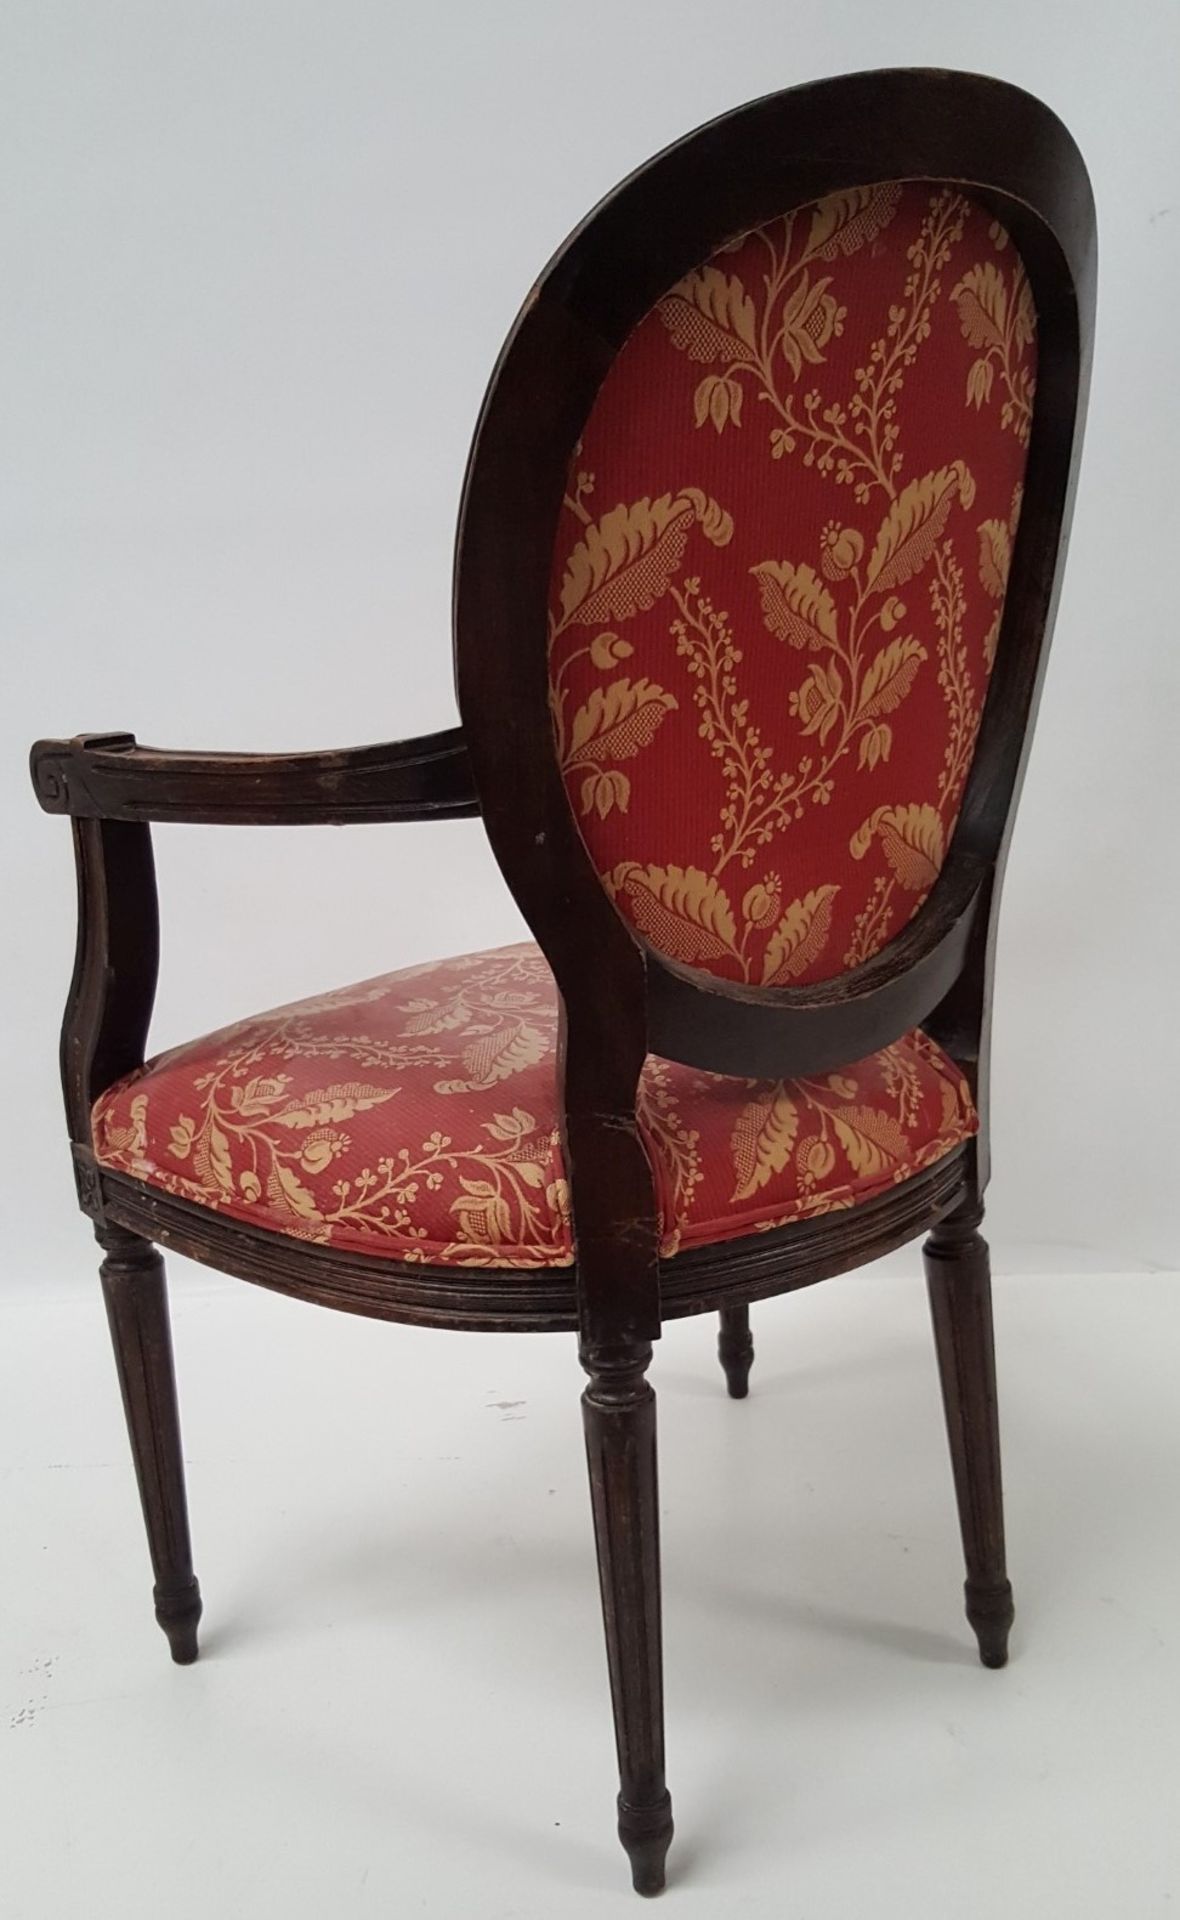 8 x Vintage Wooden Chairs Featuring Spindle Legs, And Upholstered In Red / Gold Floral Fabric - - Image 8 of 8